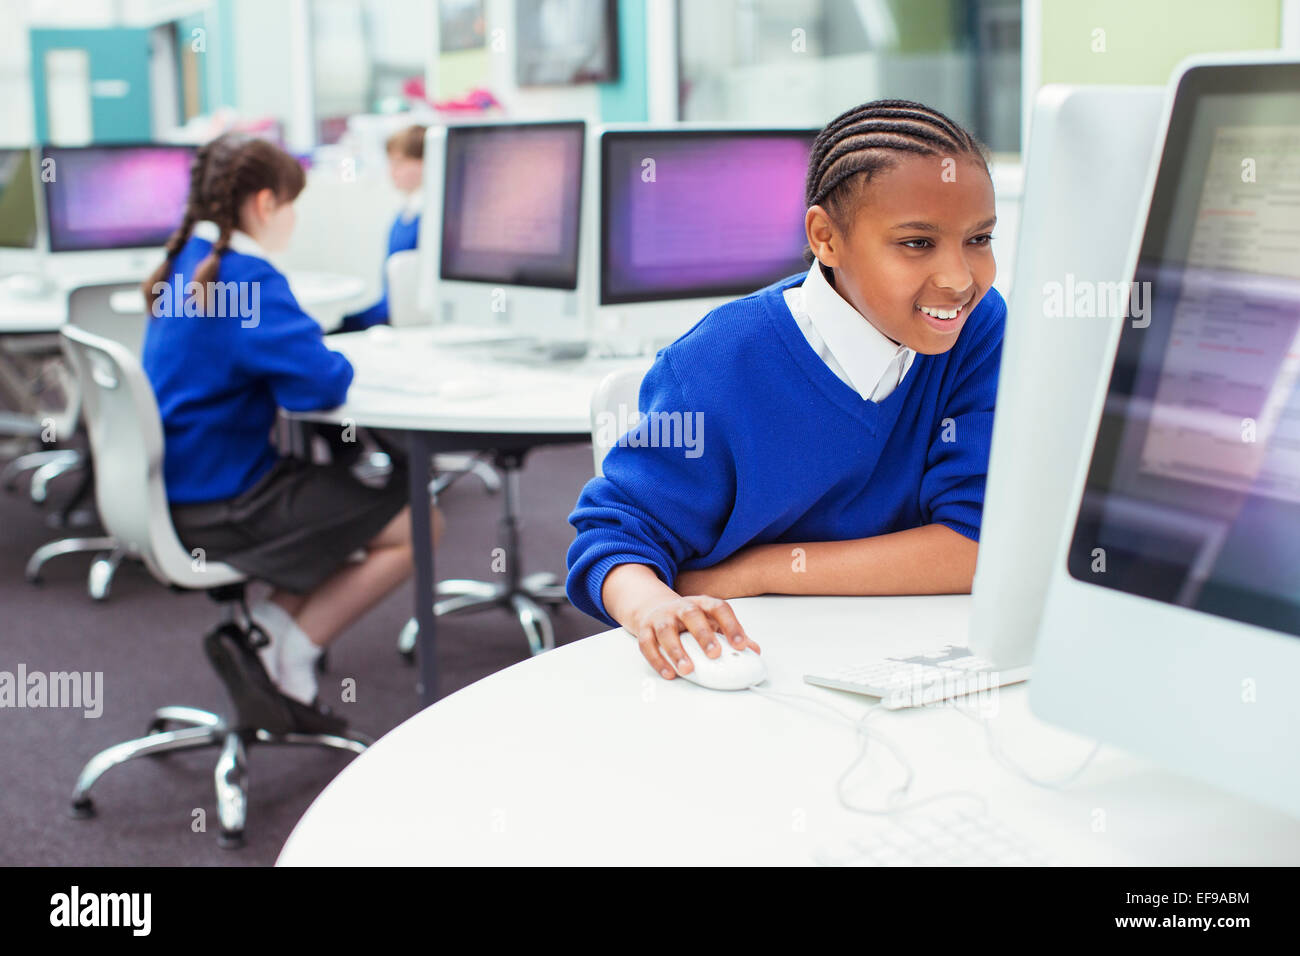 Elementary school children working with computers during IT lesson Stock Photo